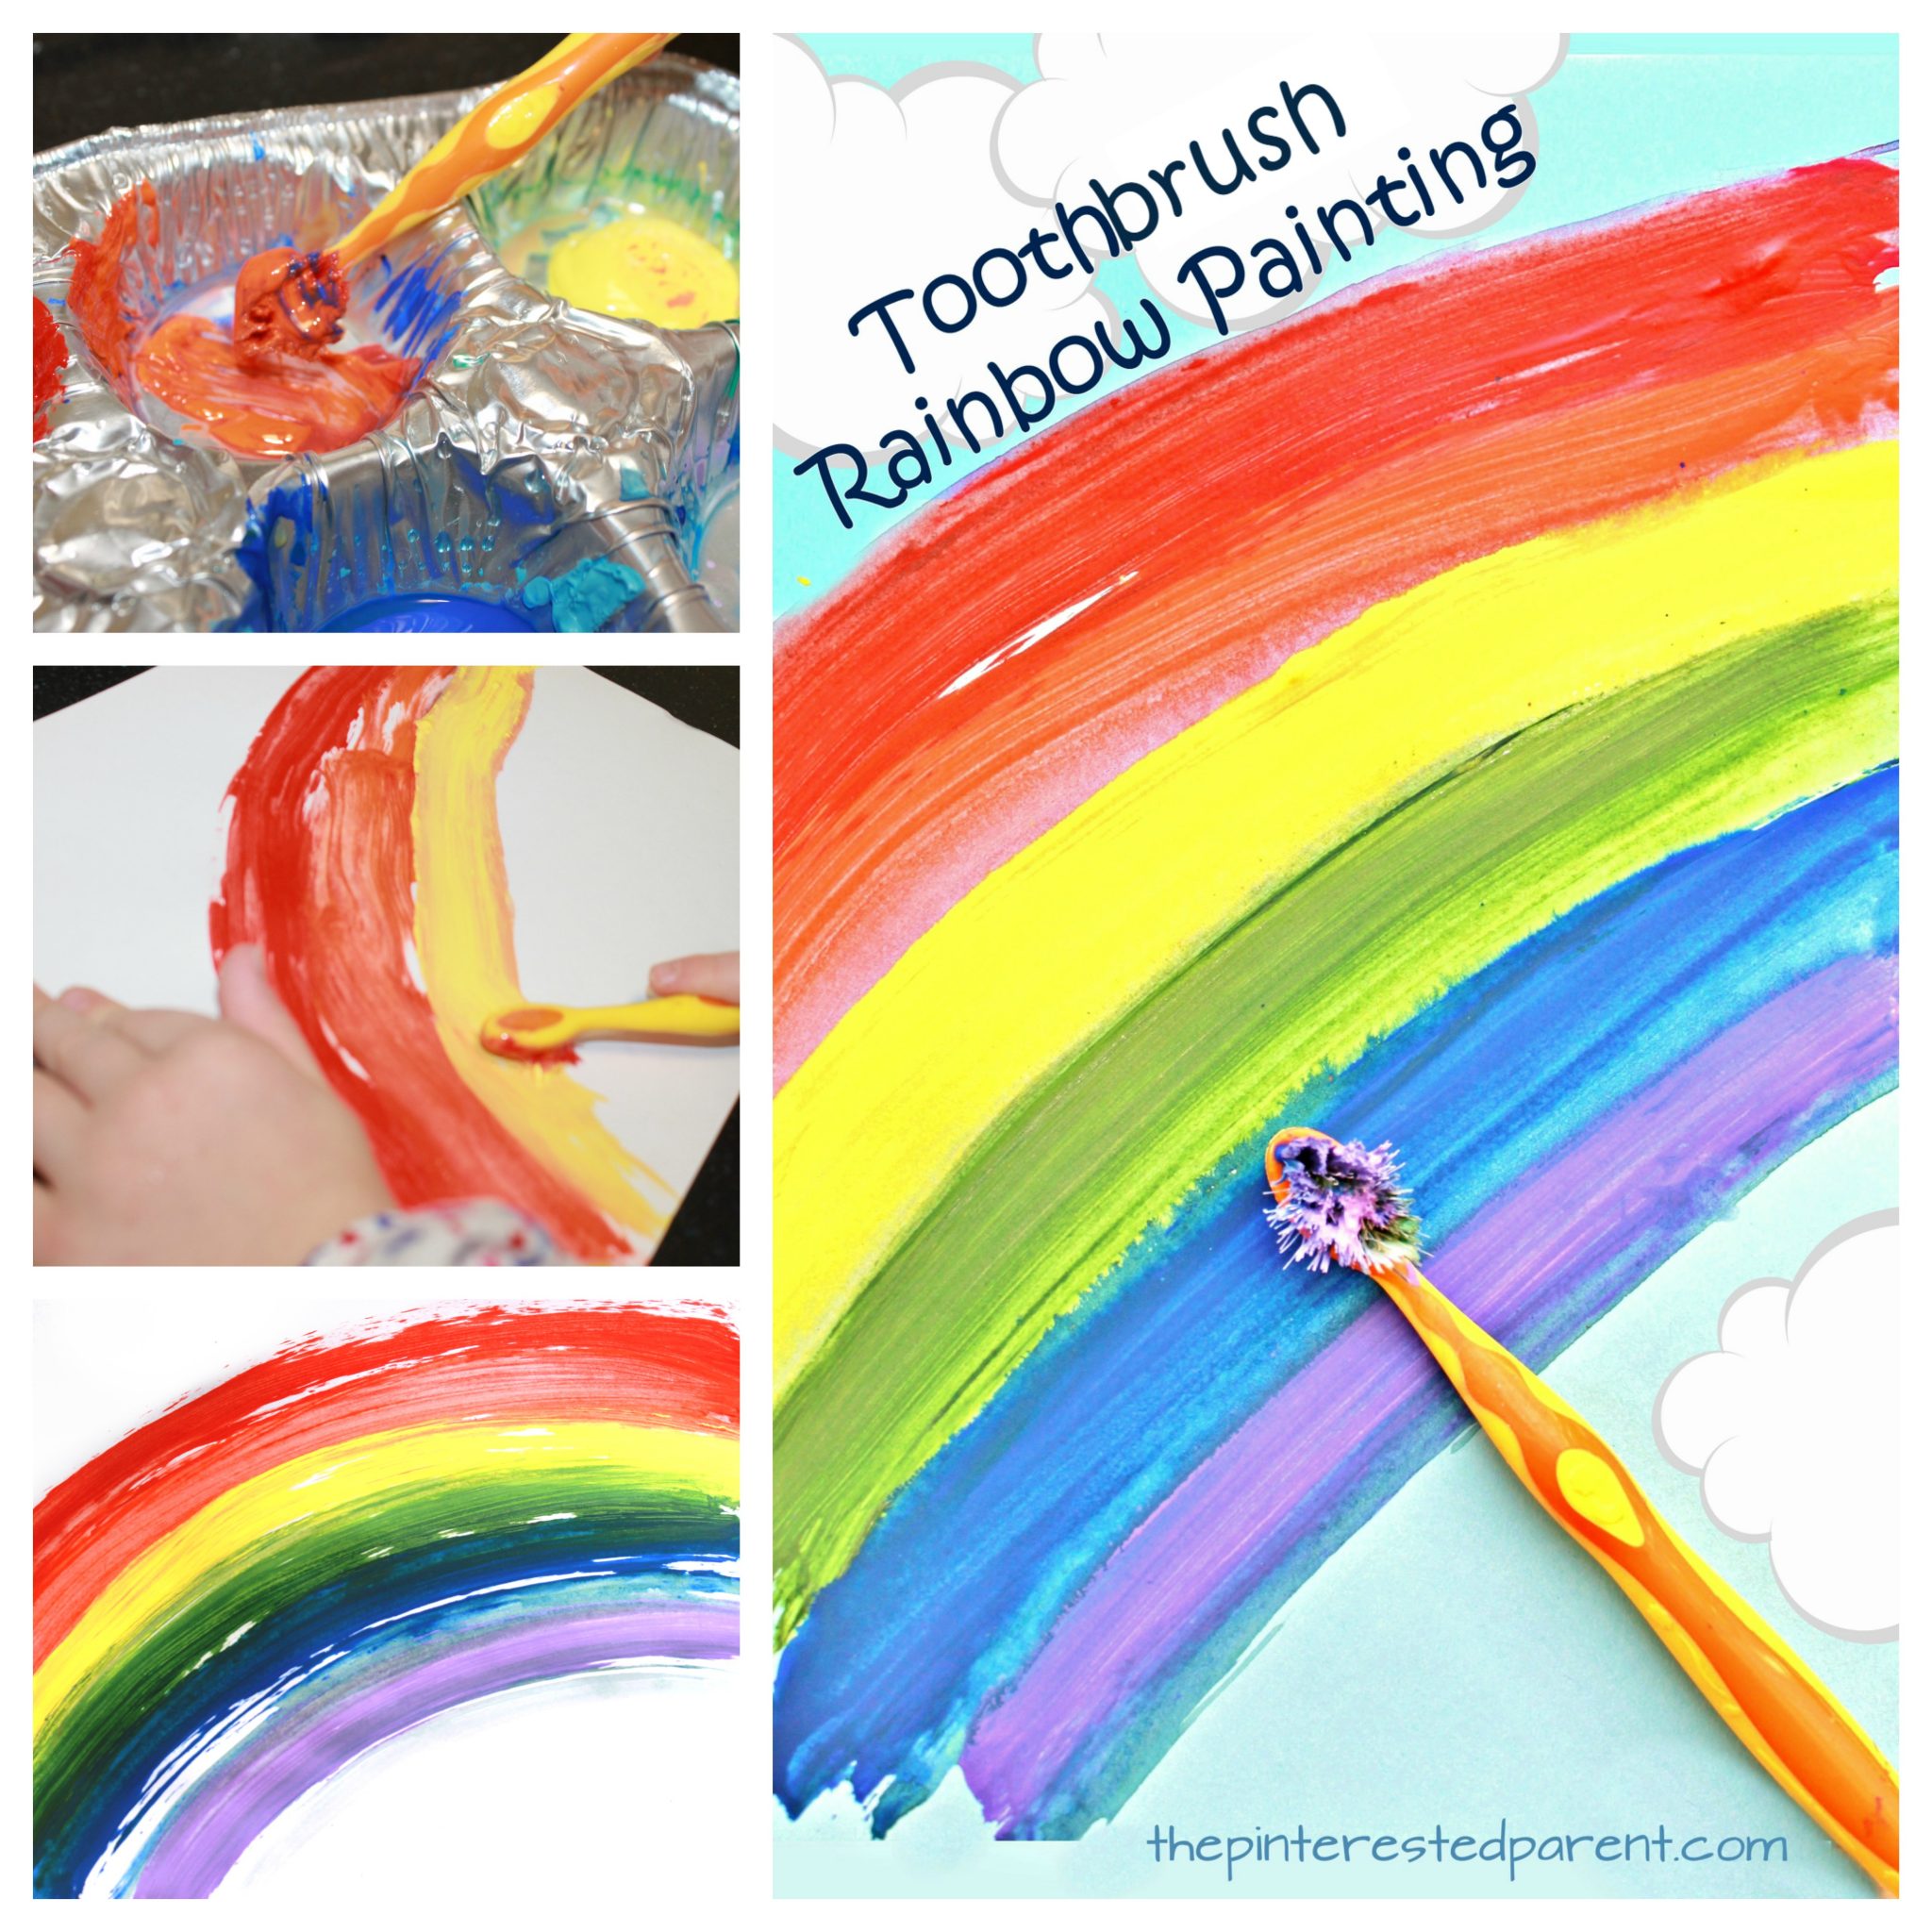 Toothbrush Painted Rainbow Art - A great spring time or St. Patrick's Day project for the kids. Arts and crafts for preschoolers and kids